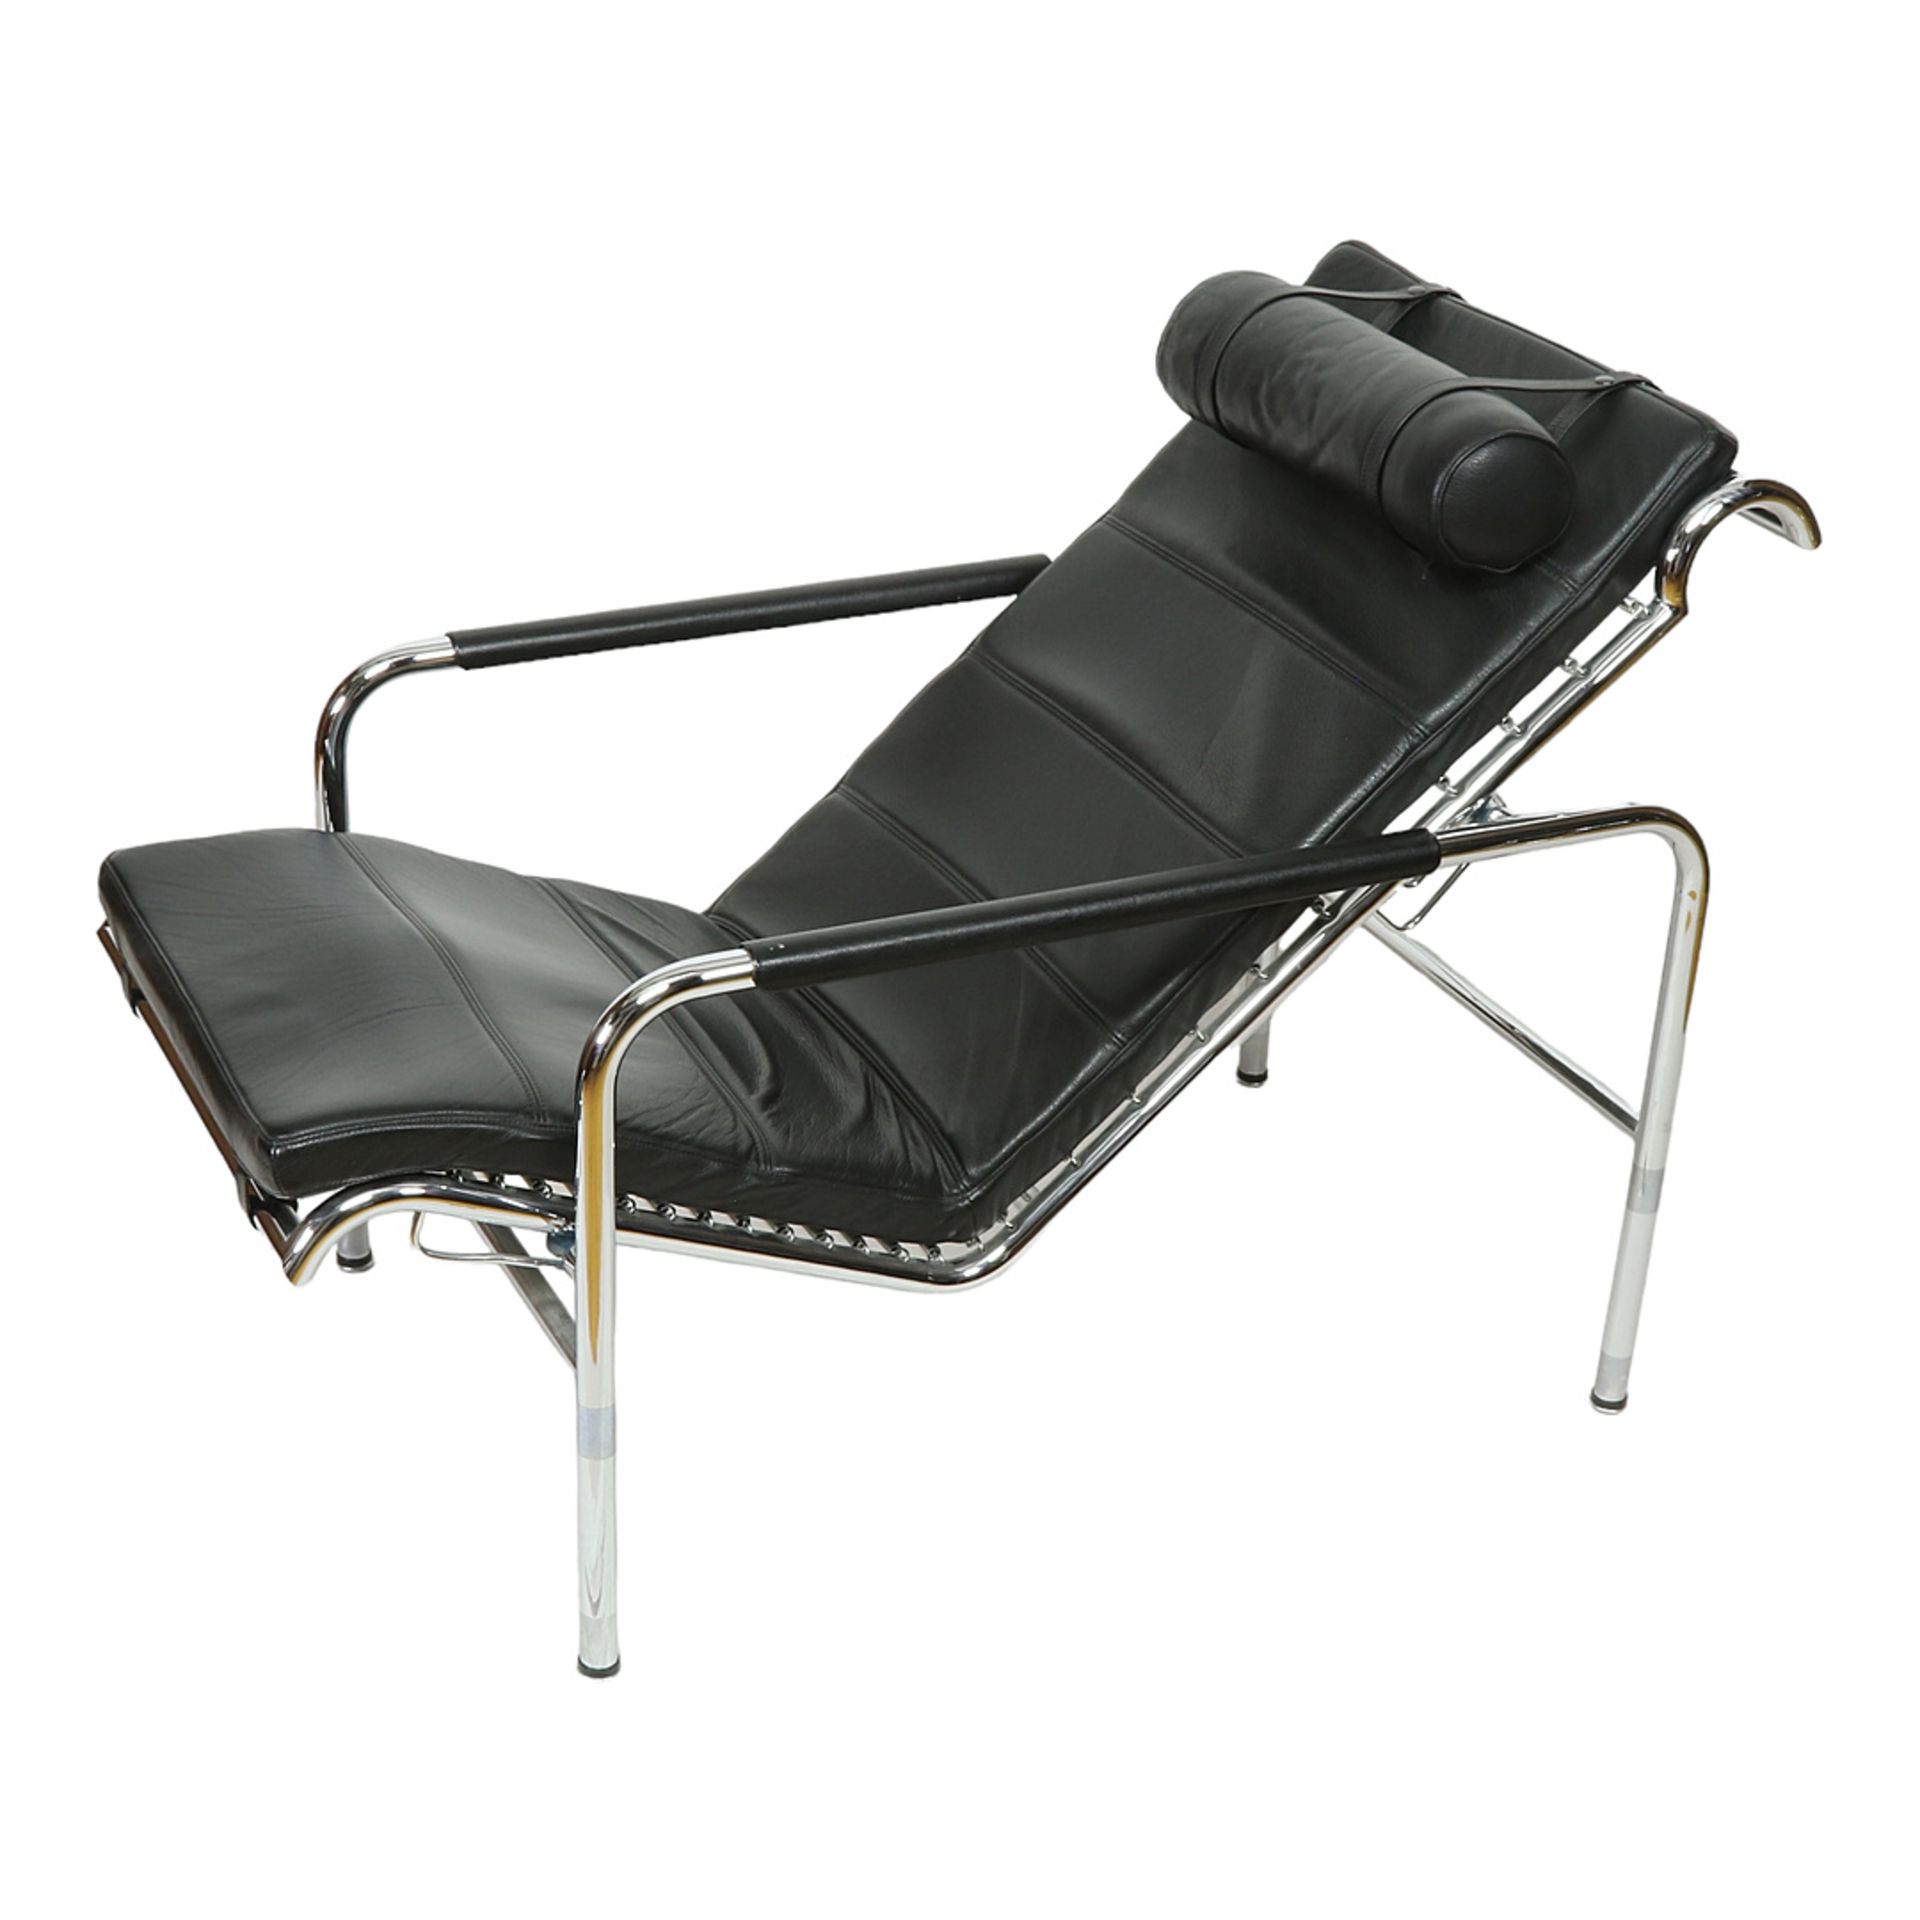 Chaise longue with stool, chrome-plated steel, black leather cover - Image 3 of 9